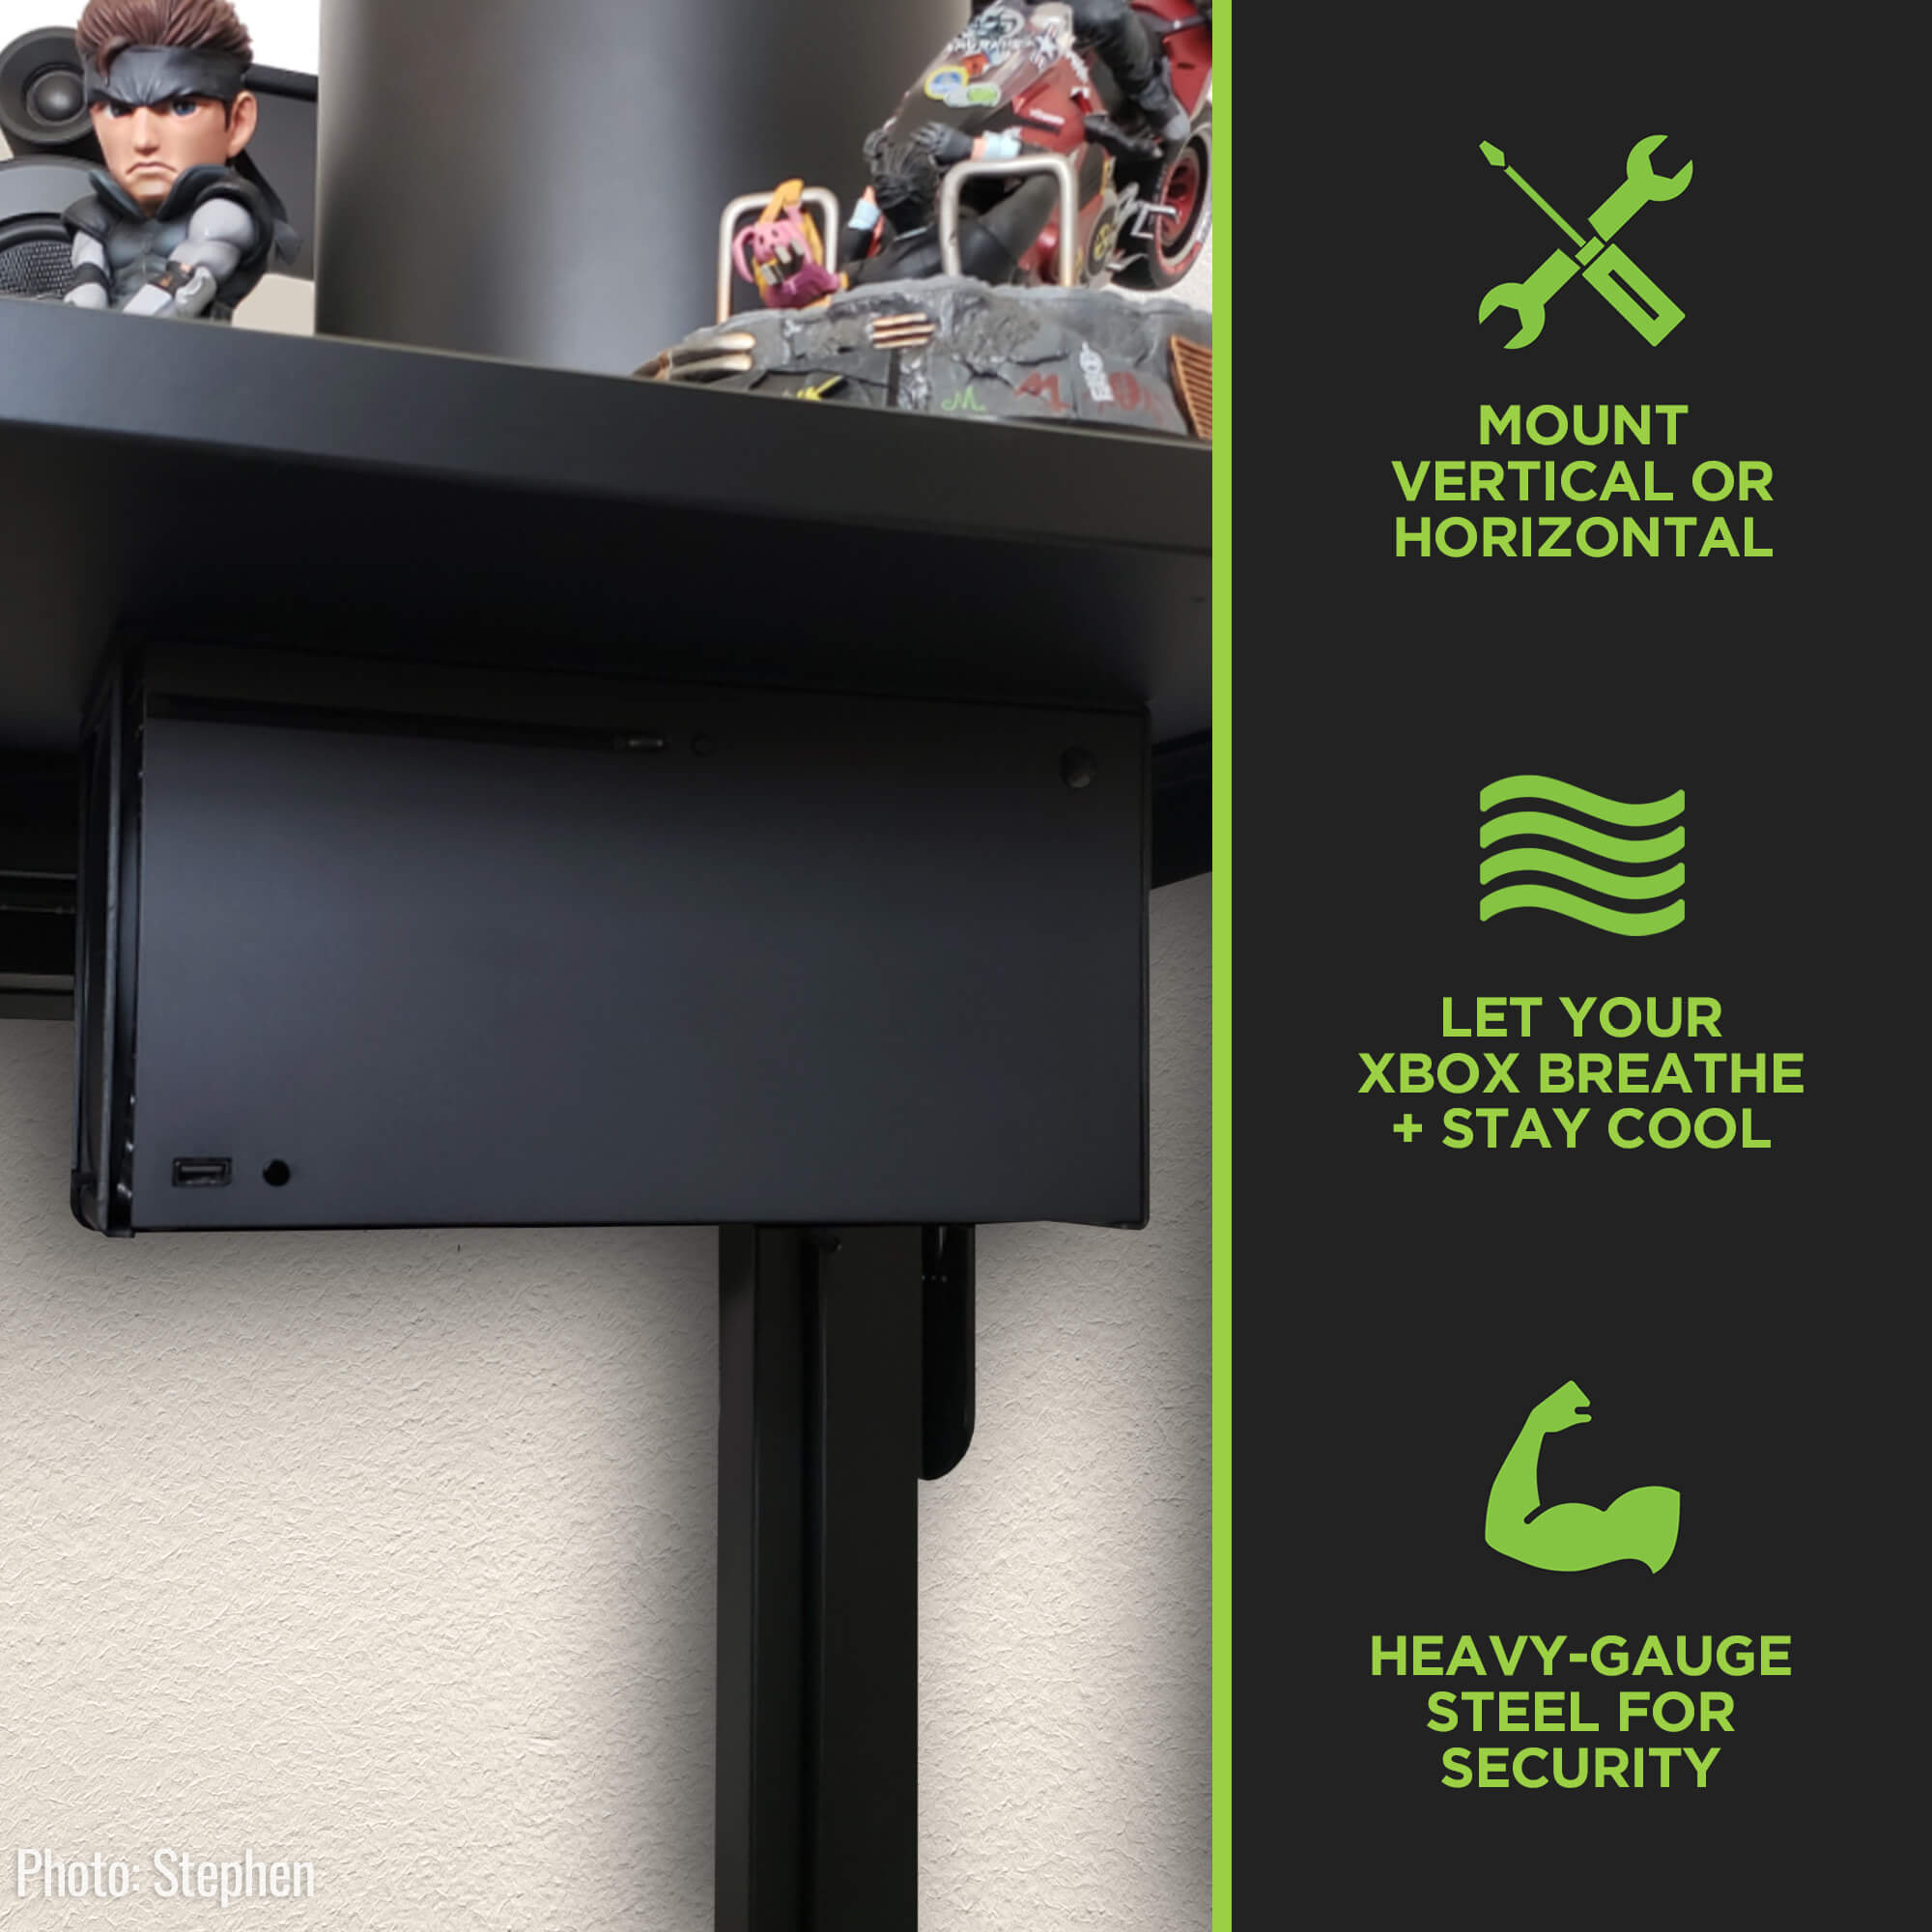 In the HIDEit Xbox Series X Mount, the Series X can be mounted vertically next to your TV or horizontally below your TV or desk.